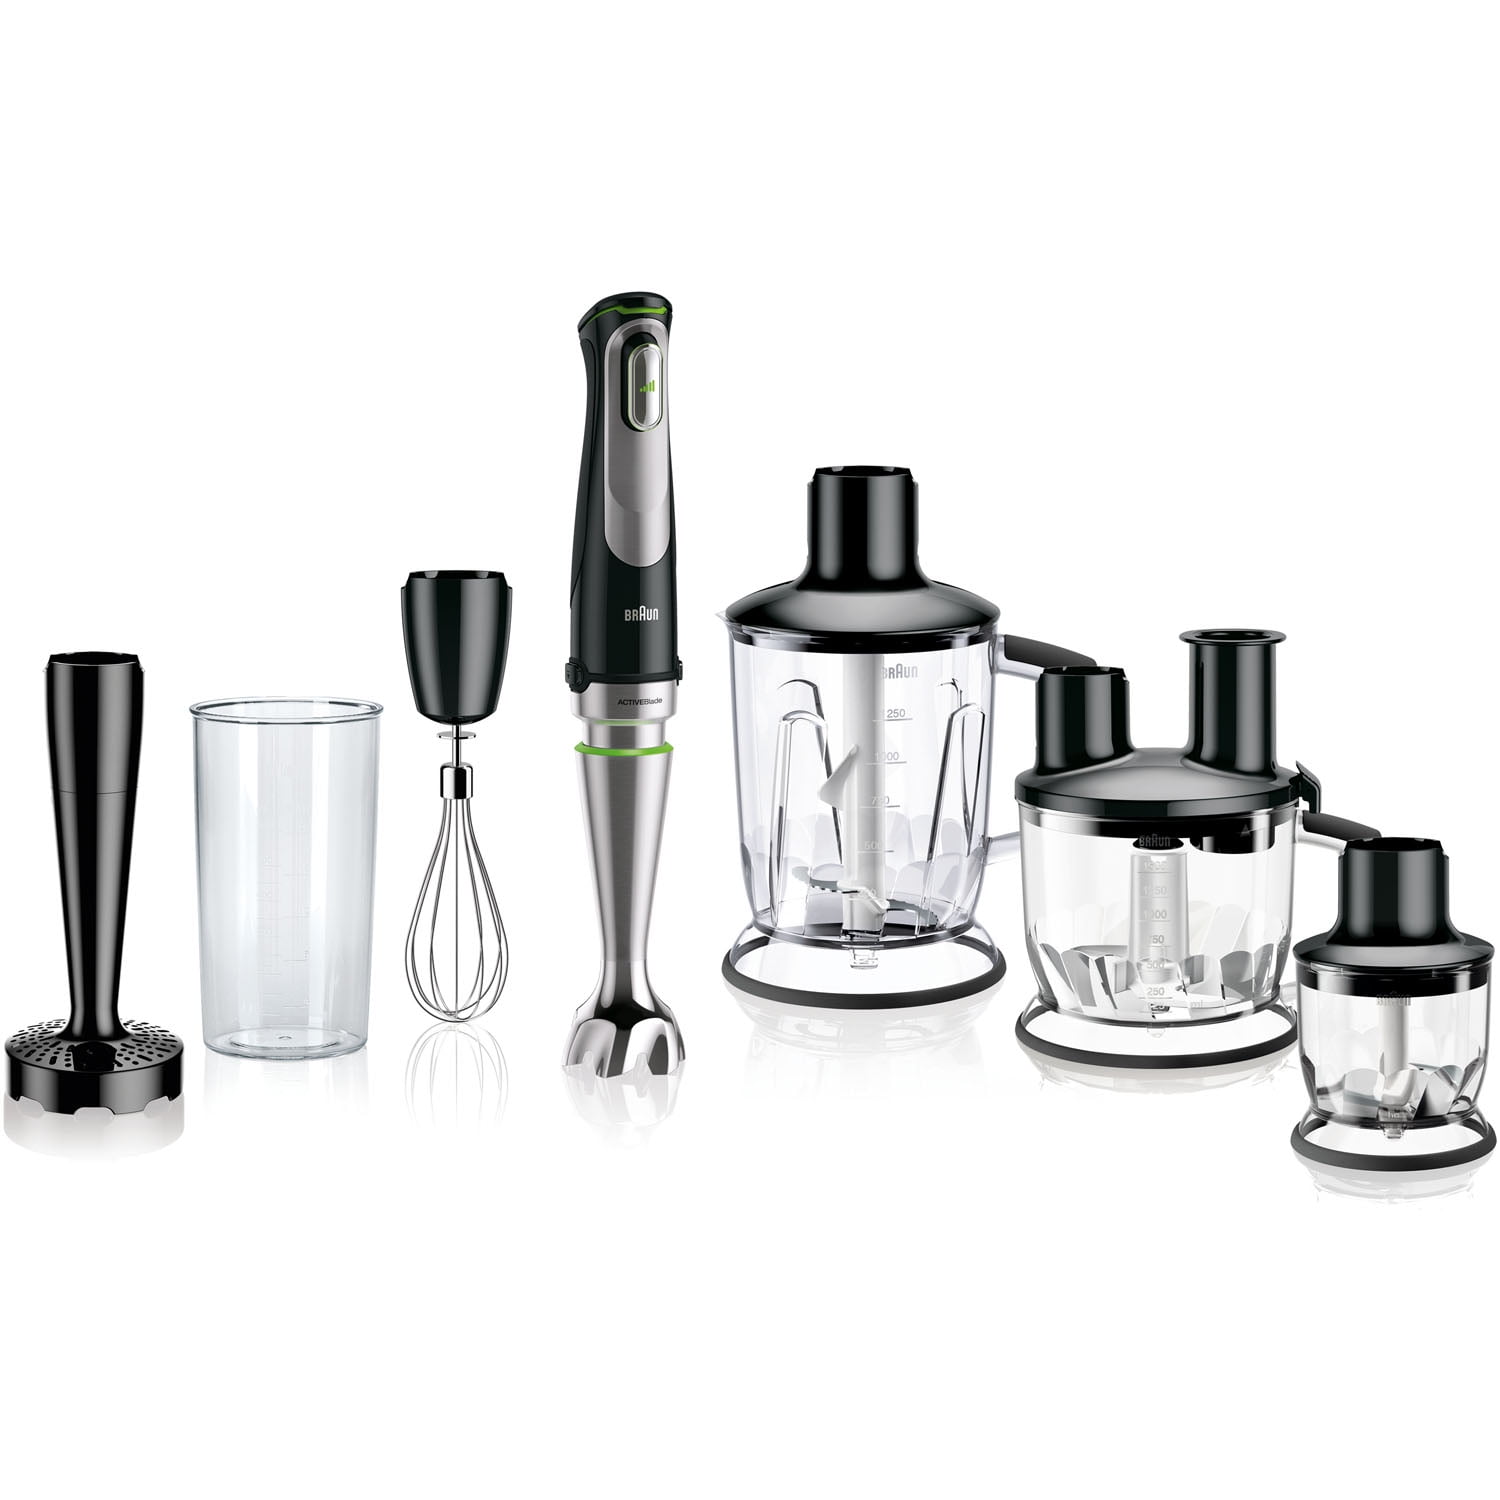 Braun MultiQuick 9 Hand Blender 1000 Watt Black MQ9087X Prices & Features  in Egypt. Free Home Delivery. Cairo Sales Stores